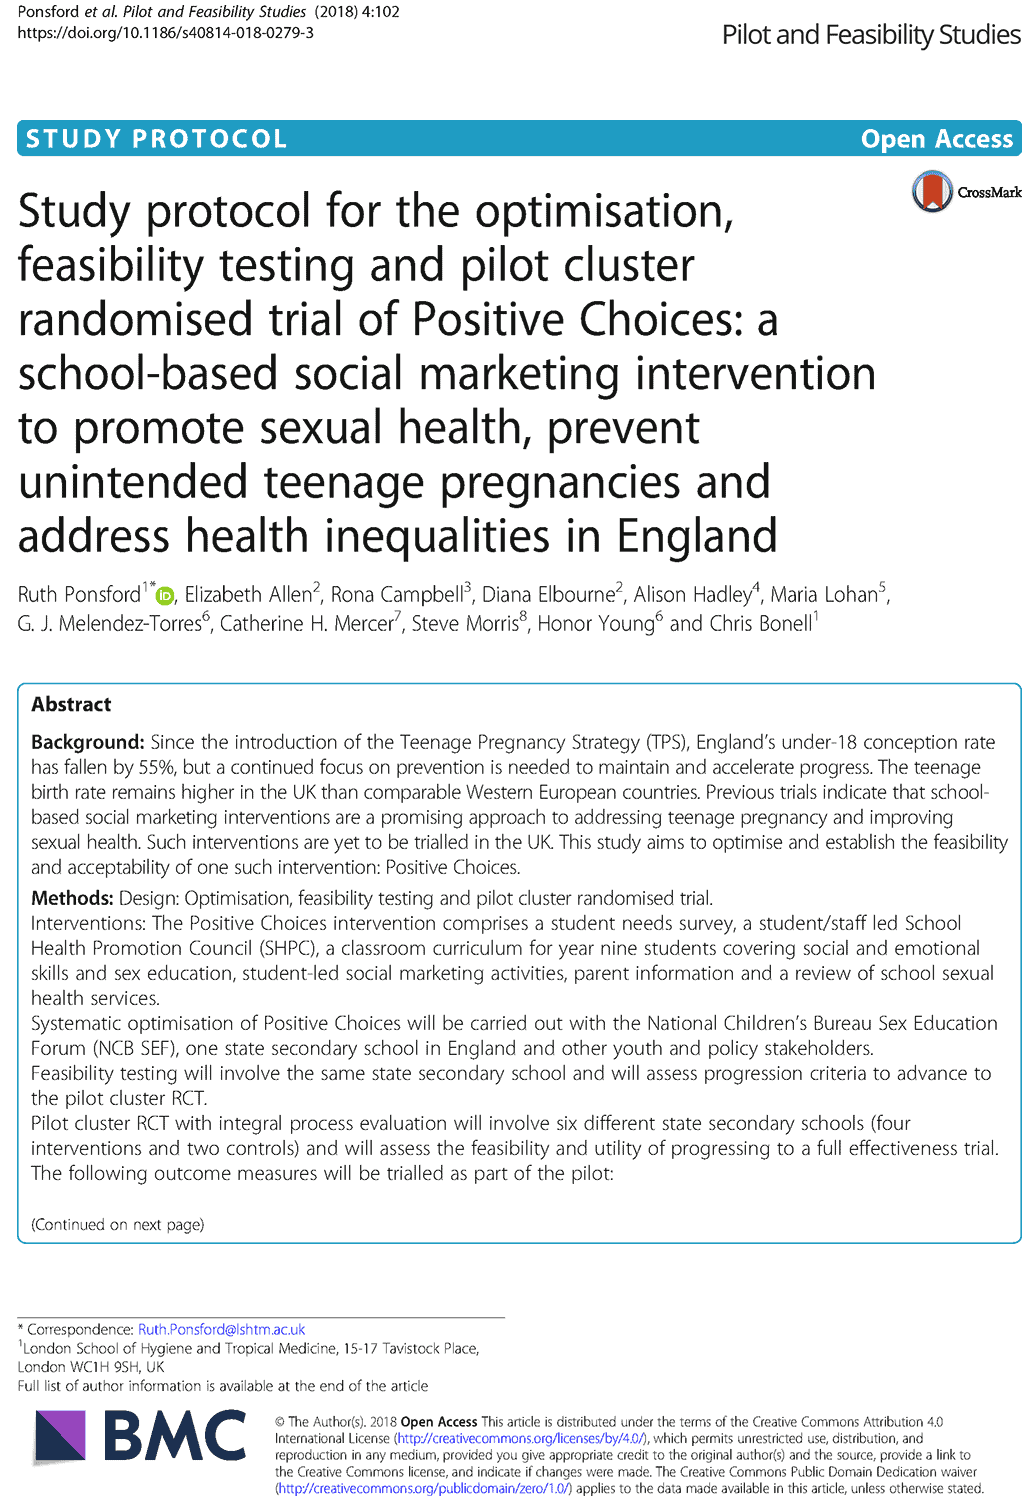 Study protocol for the optimisation, feasibility testing and pilot cluster randomised trial of Positive Choices: a school-based social marketing intervention to promote sexual health, prevent unintended teenage pregnancies and address health inequalities in England